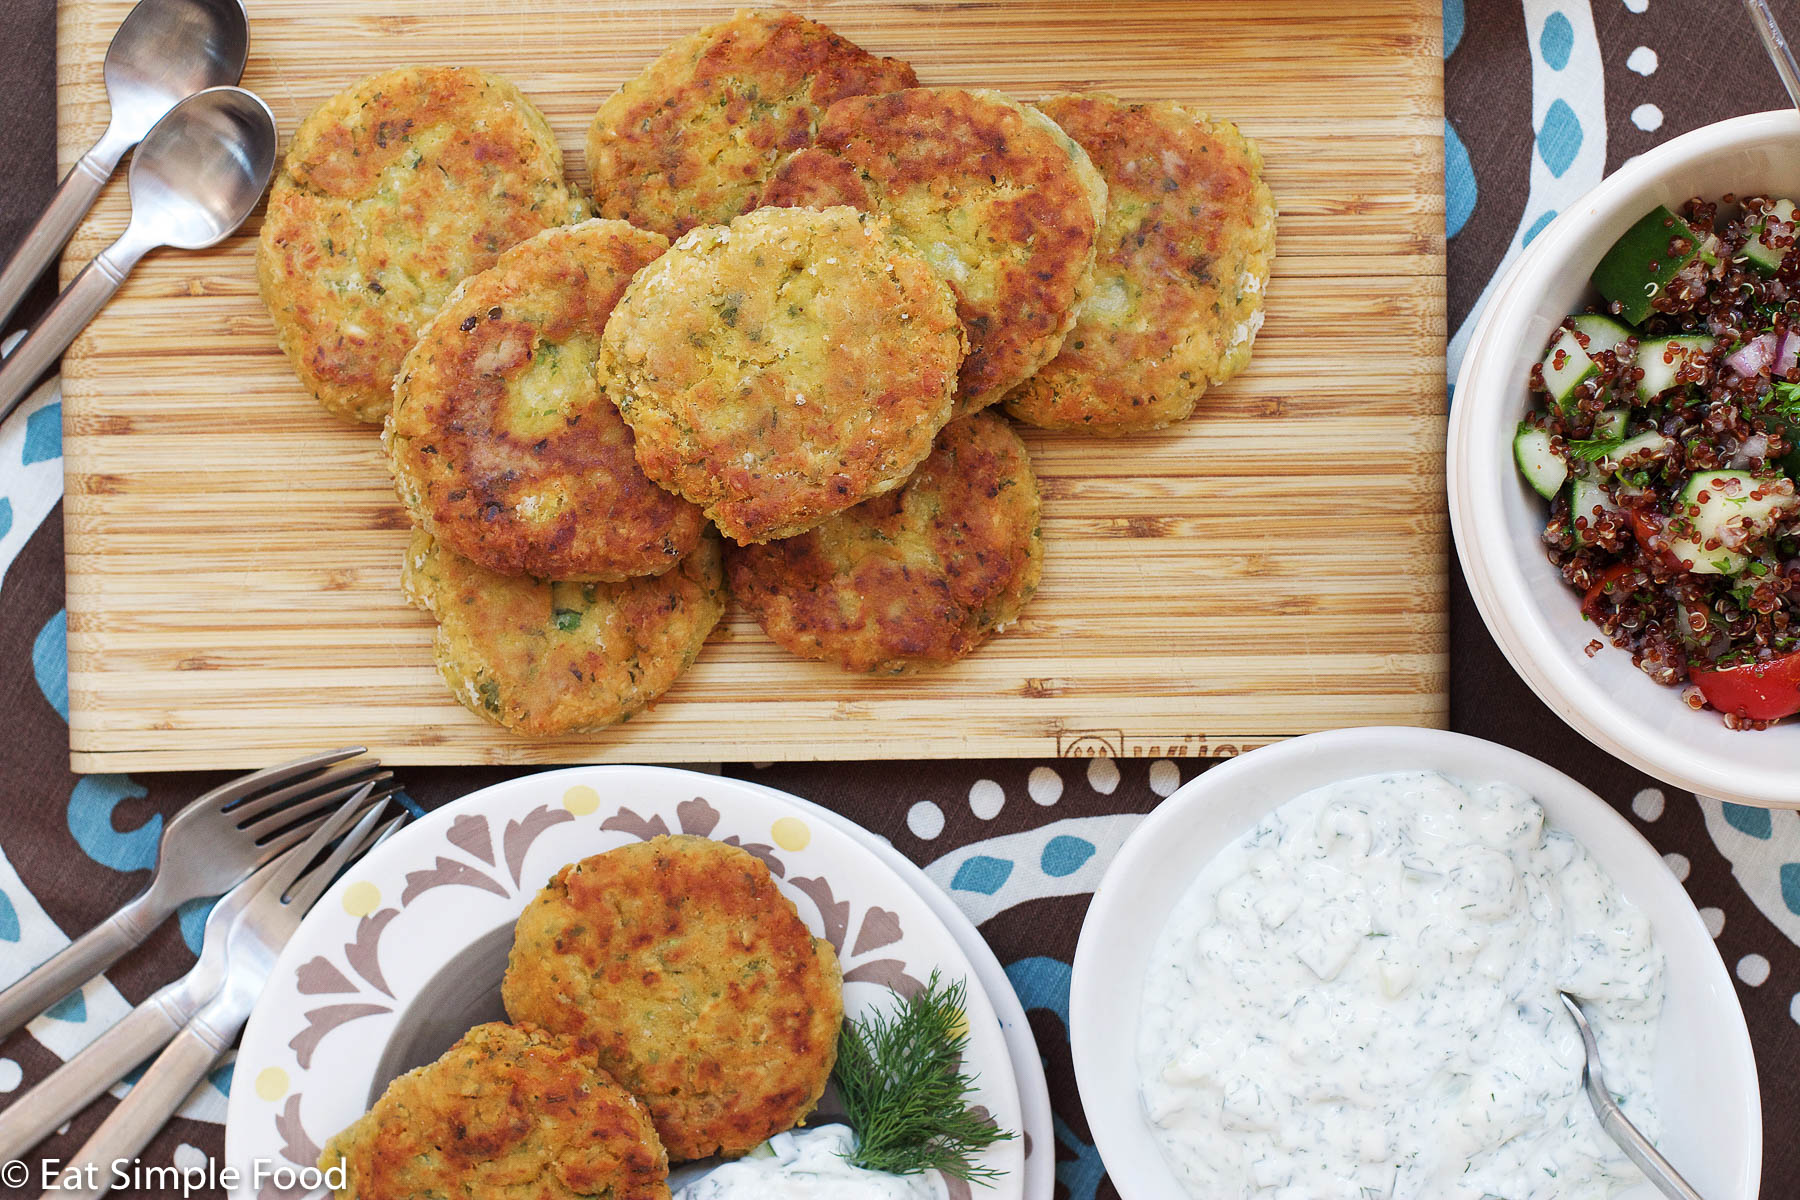 Top View of Falafels on a wood cutting board with a side plate of 2 falafels and a bowl of white cucumber tzatziki